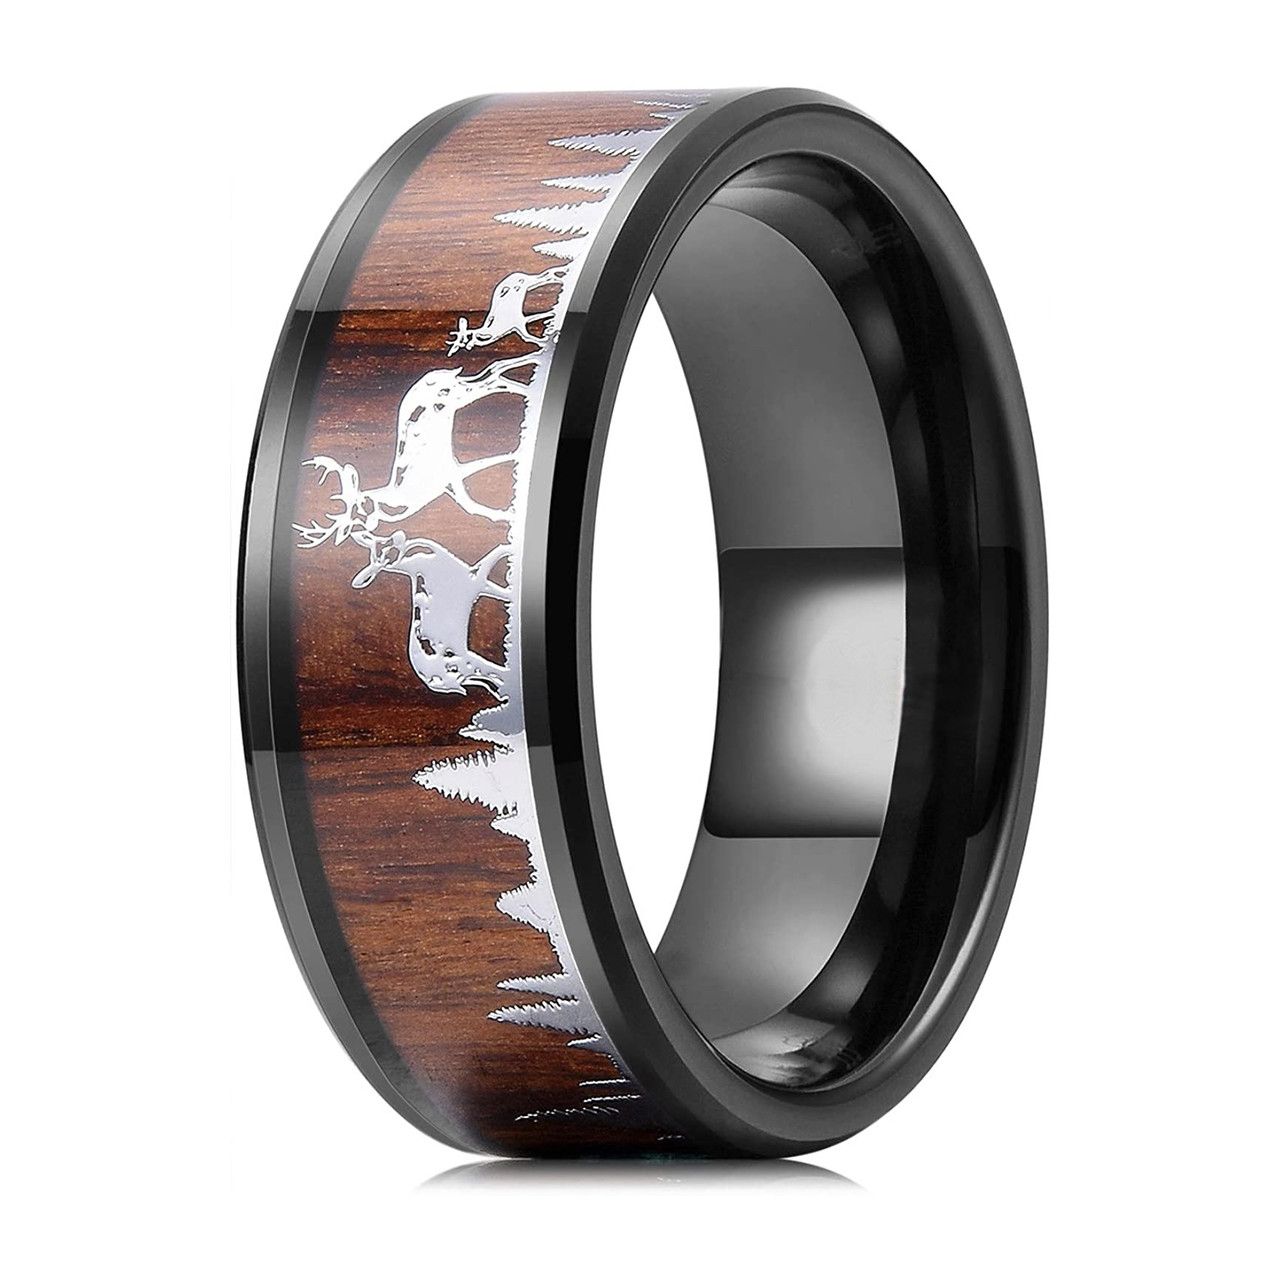 (8mm)  Unisex or Men's Hunting Ring / Deer Crossing Wedding ring band. Black Tungsten Carbide Band with Deer Silhouette over Real Koa Wood. Hunter's Wedding ring band Comfort Fit Ring